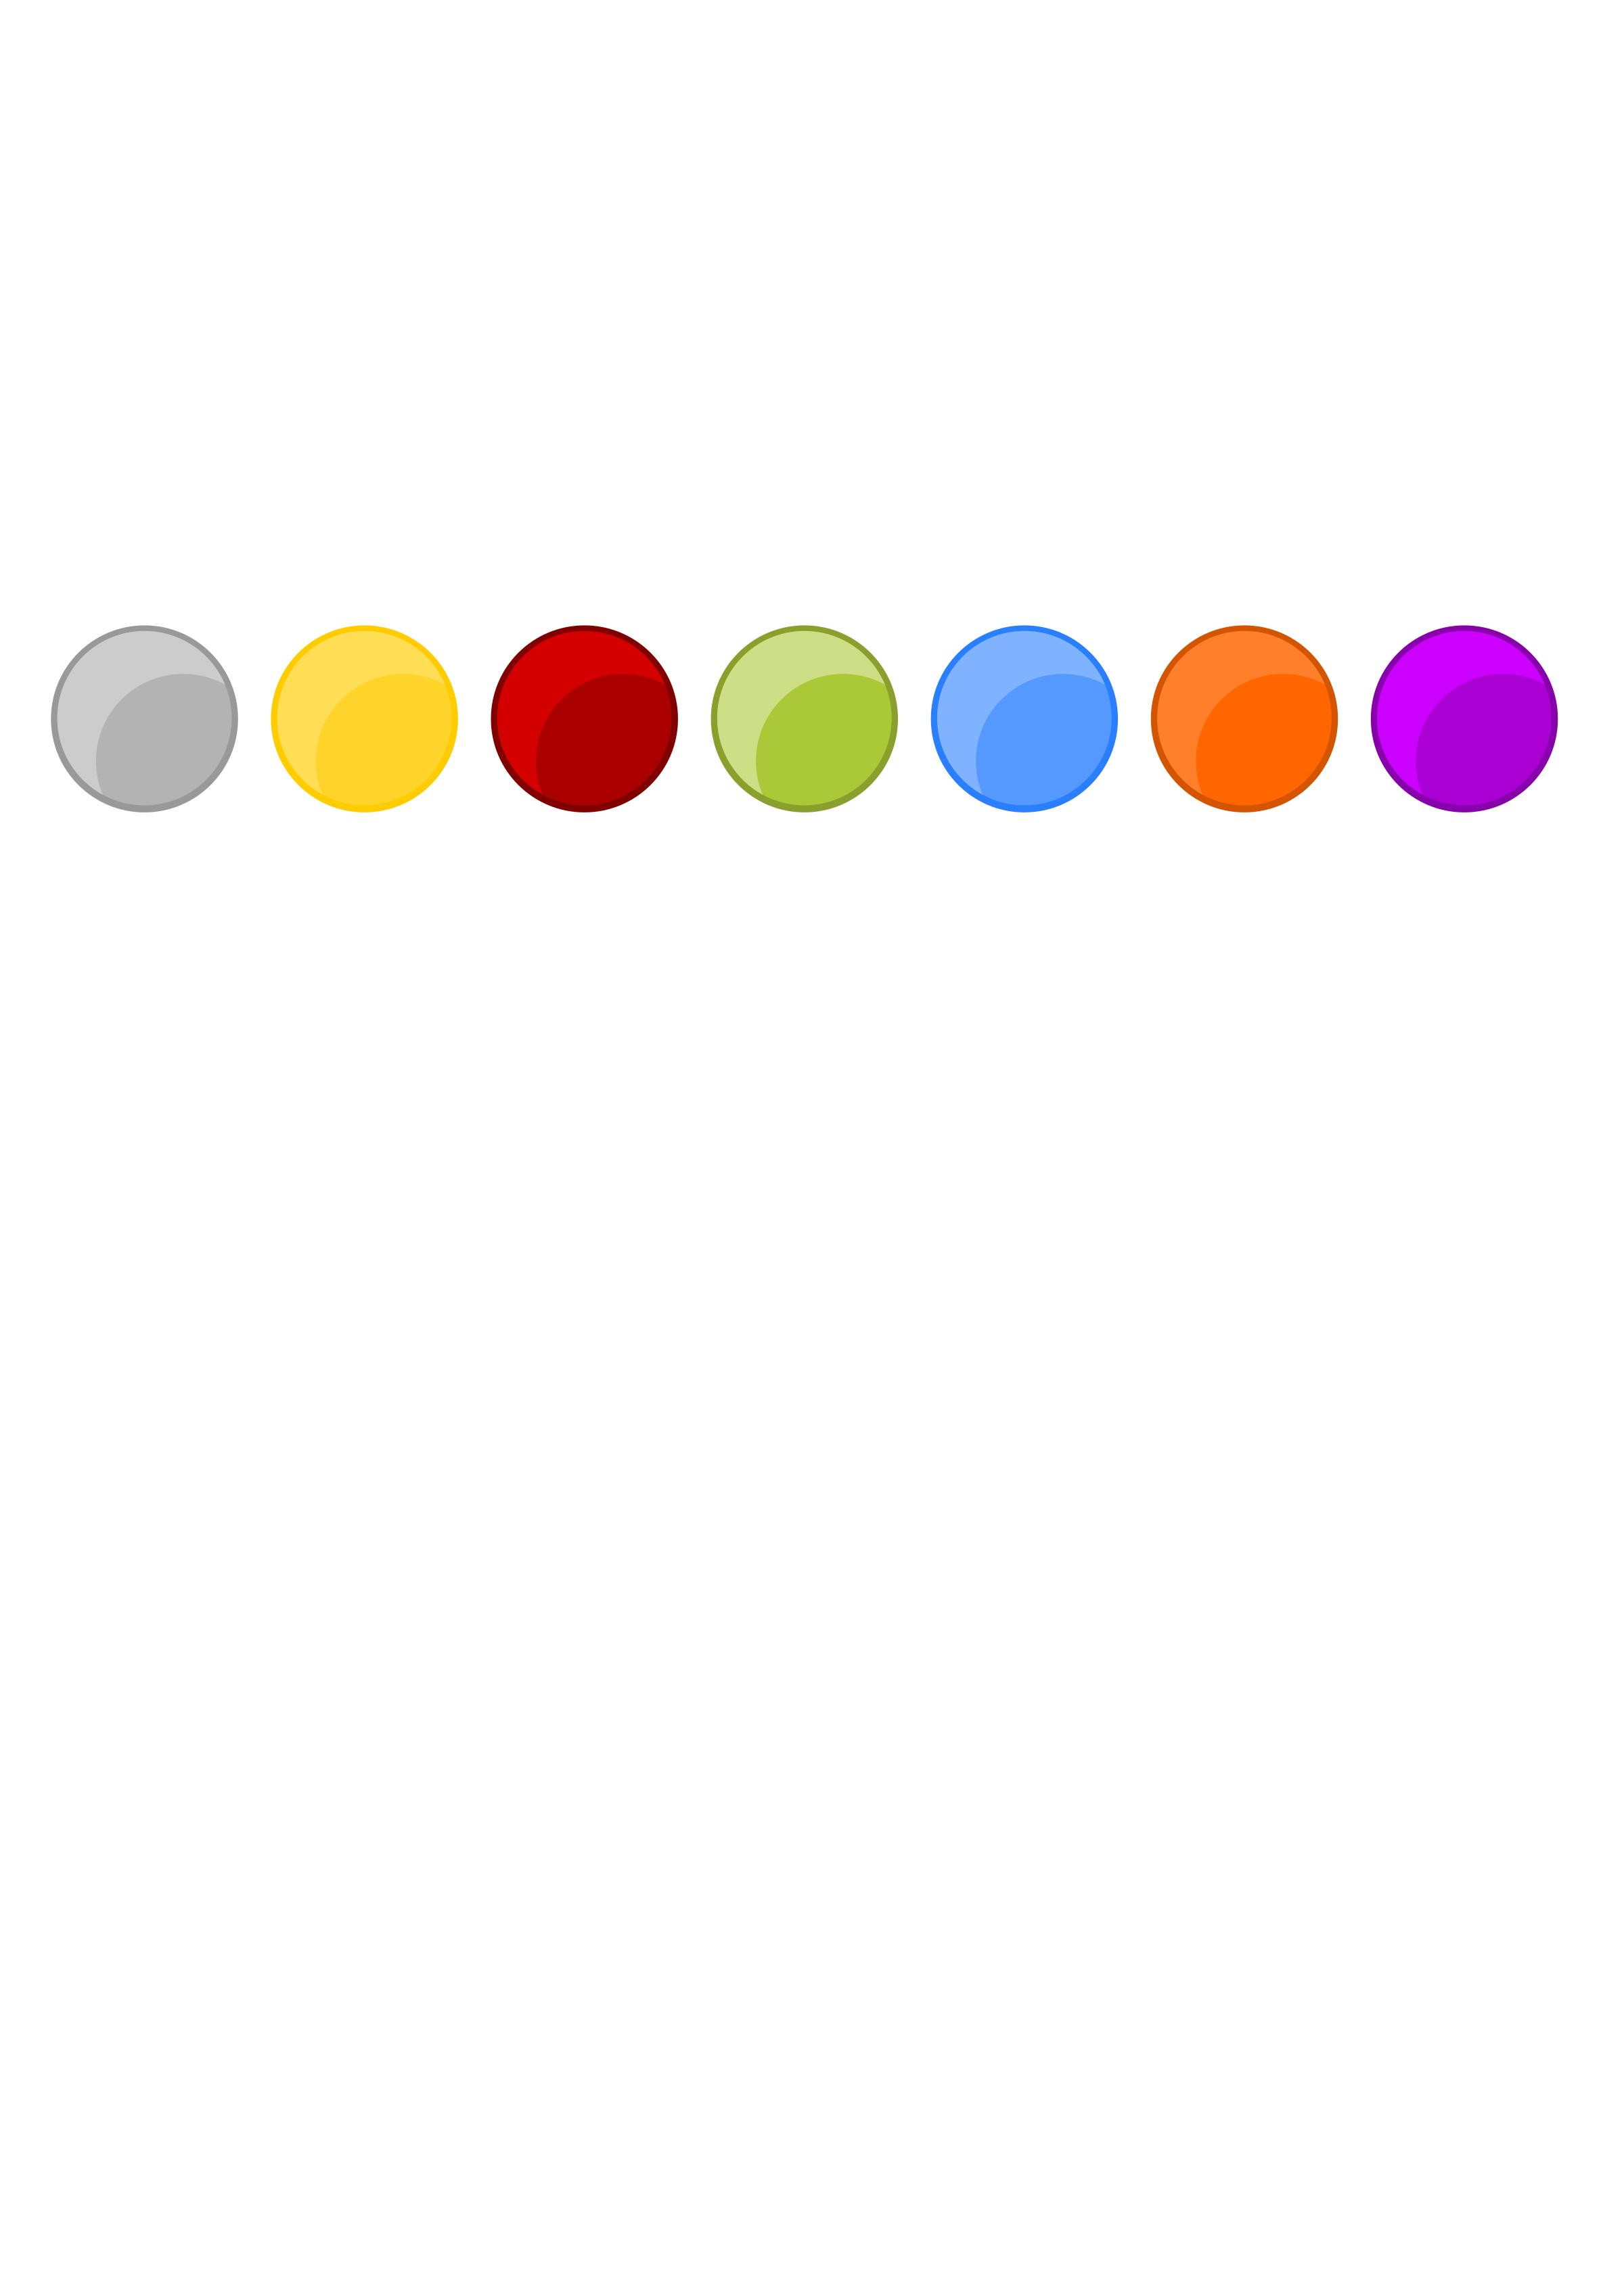 Colorful Circle Icon Backgrounds png